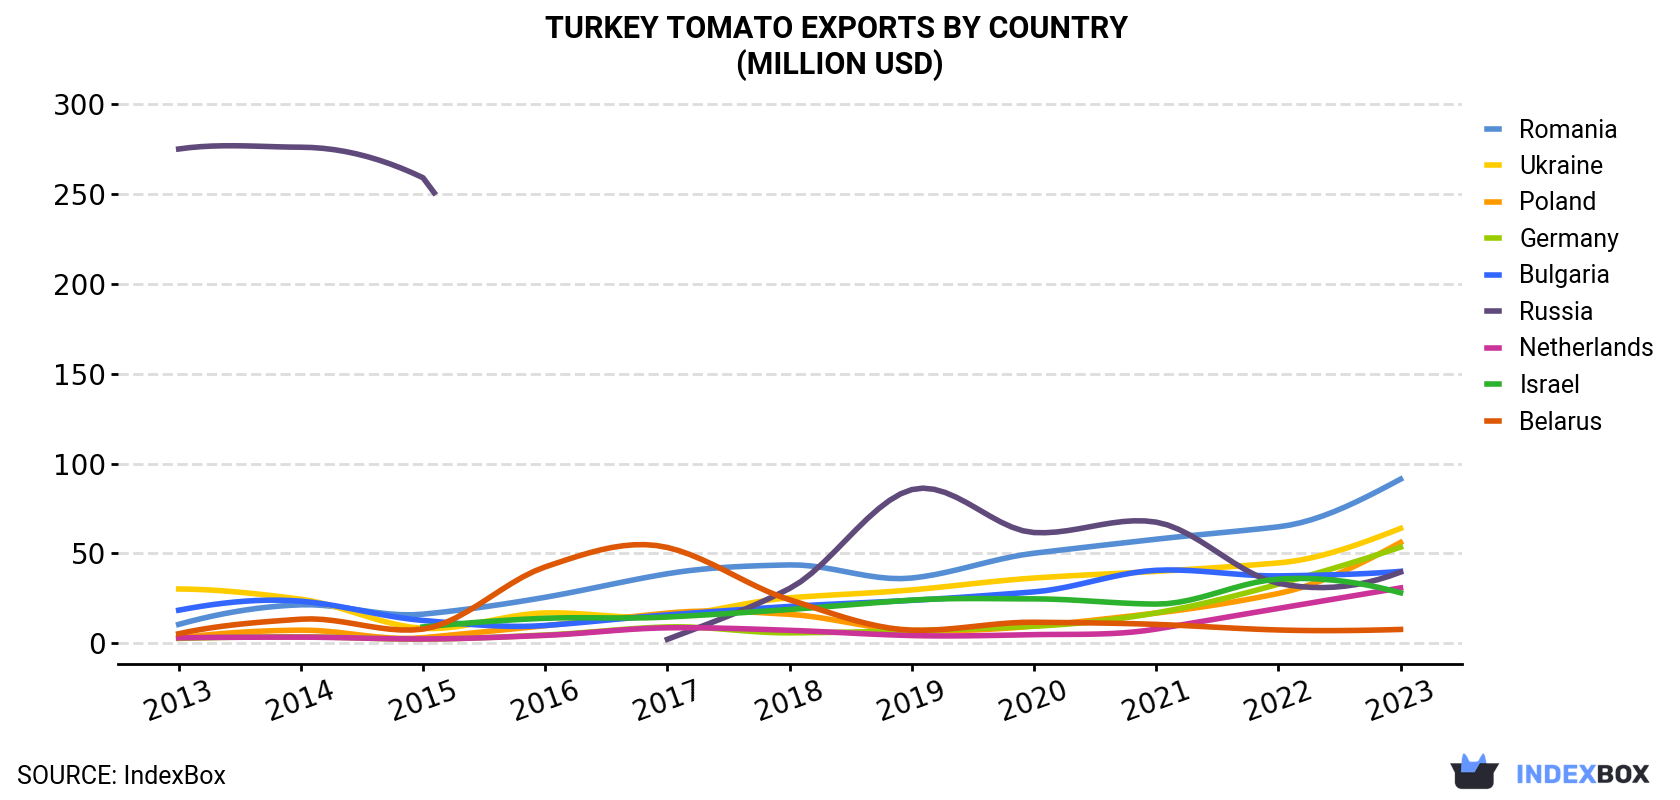 Turkey Tomato Exports By Country (Million USD)